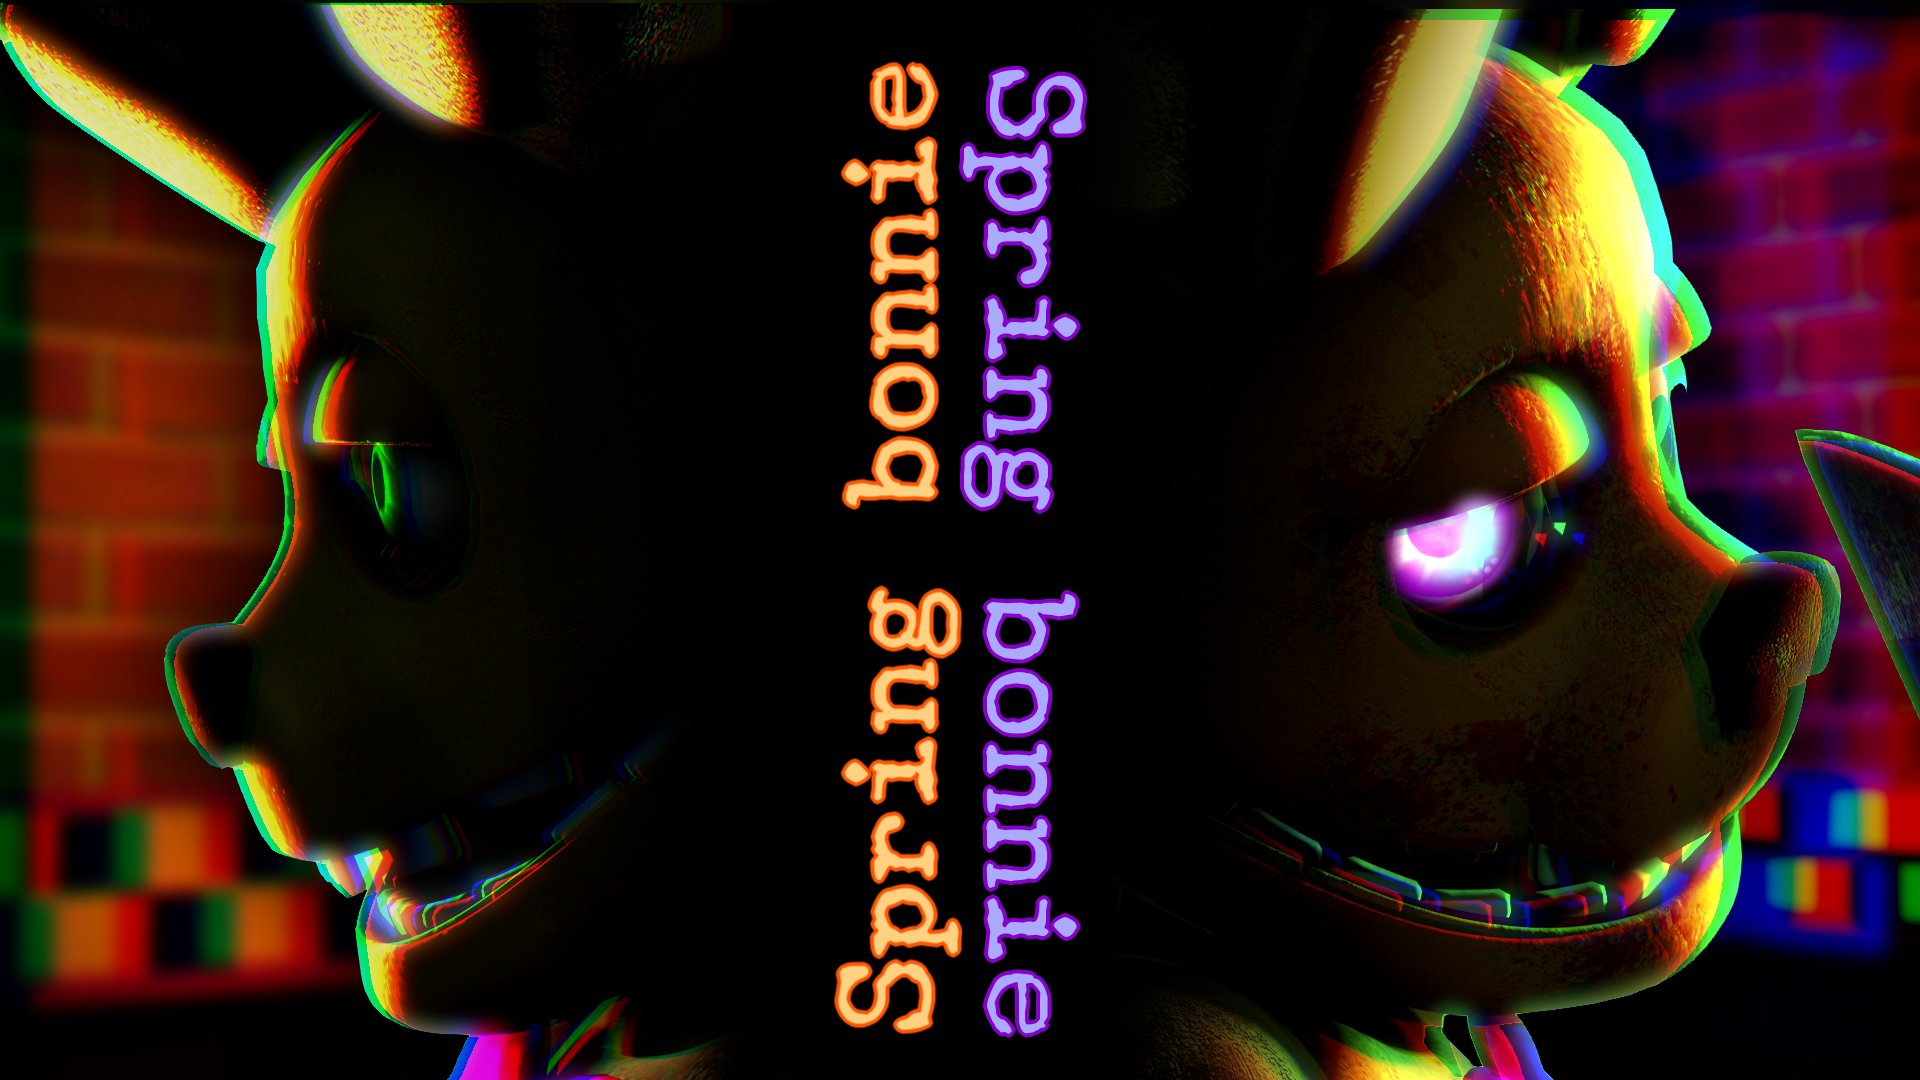 Spring Bonnie retexture  Wallpapers and art  Mineimator forums